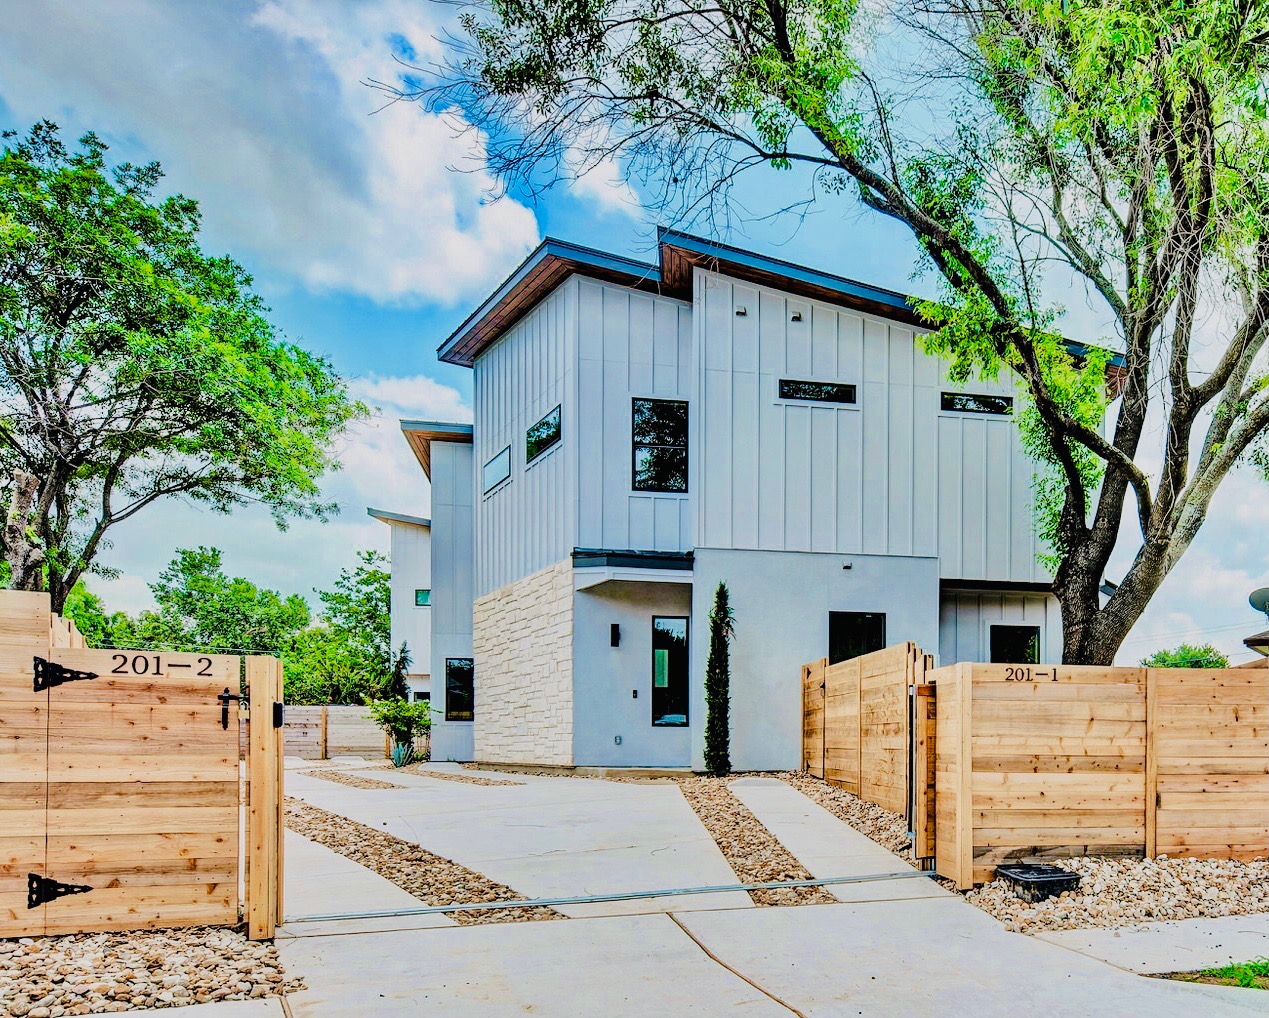 The 201 Tillery Square, Building 1 - <b>SOLD</b> is ready for move in and is an exciting new modern home with 2 Bedrooms, 2.5 Bathrooms, and its own Carport.